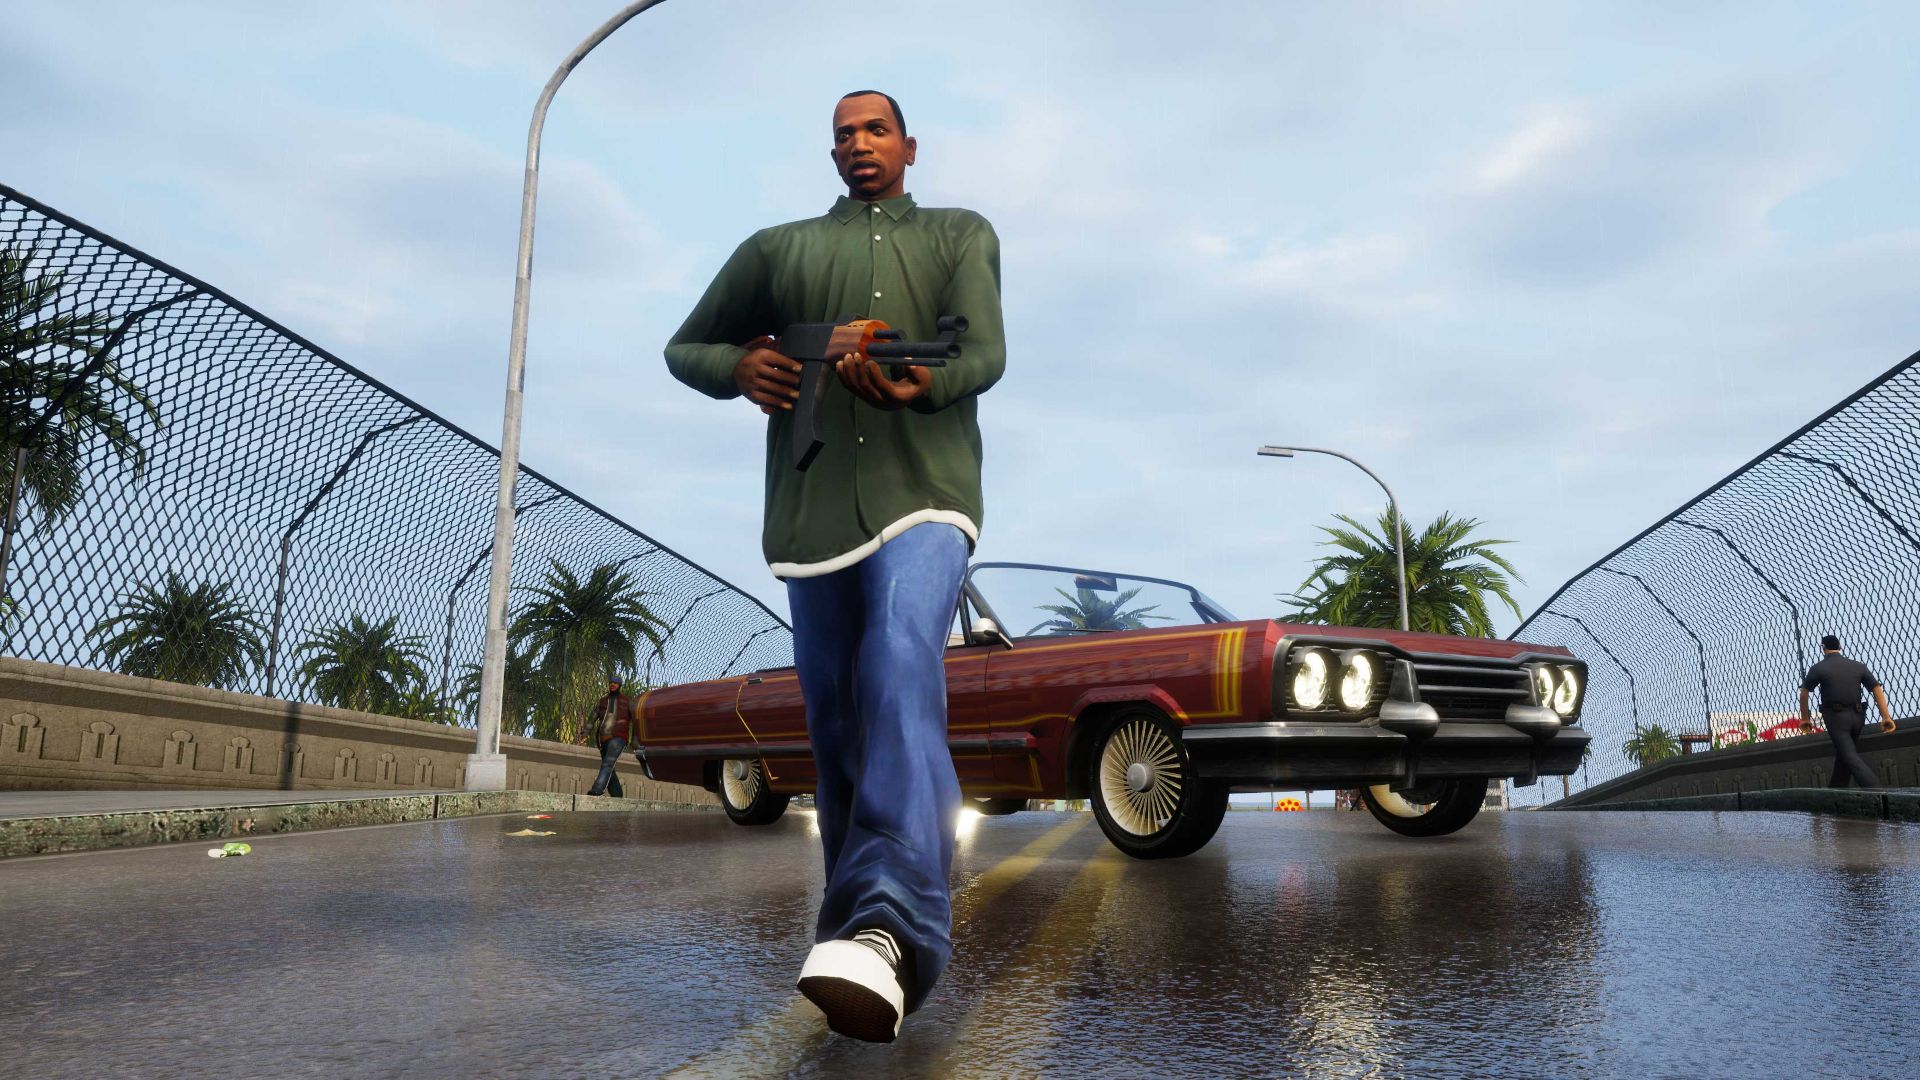 Gta Trilogy S Mobile Port Has Been Delayed And That S A Good Thing